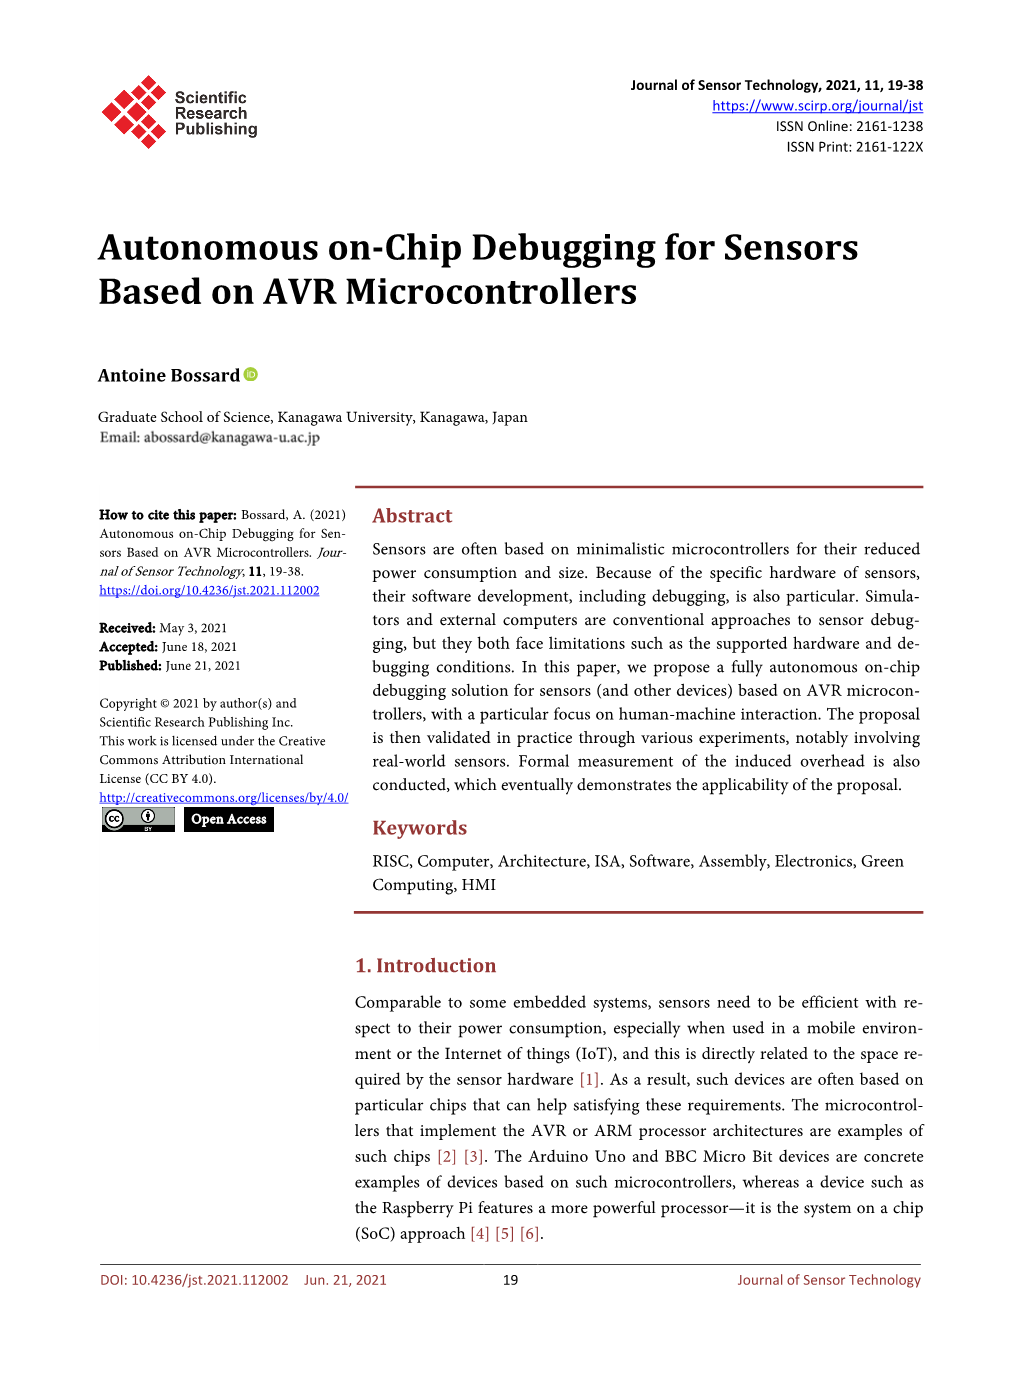 Autonomous On-Chip Debugging for Sensors Based on AVR Microcontrollers